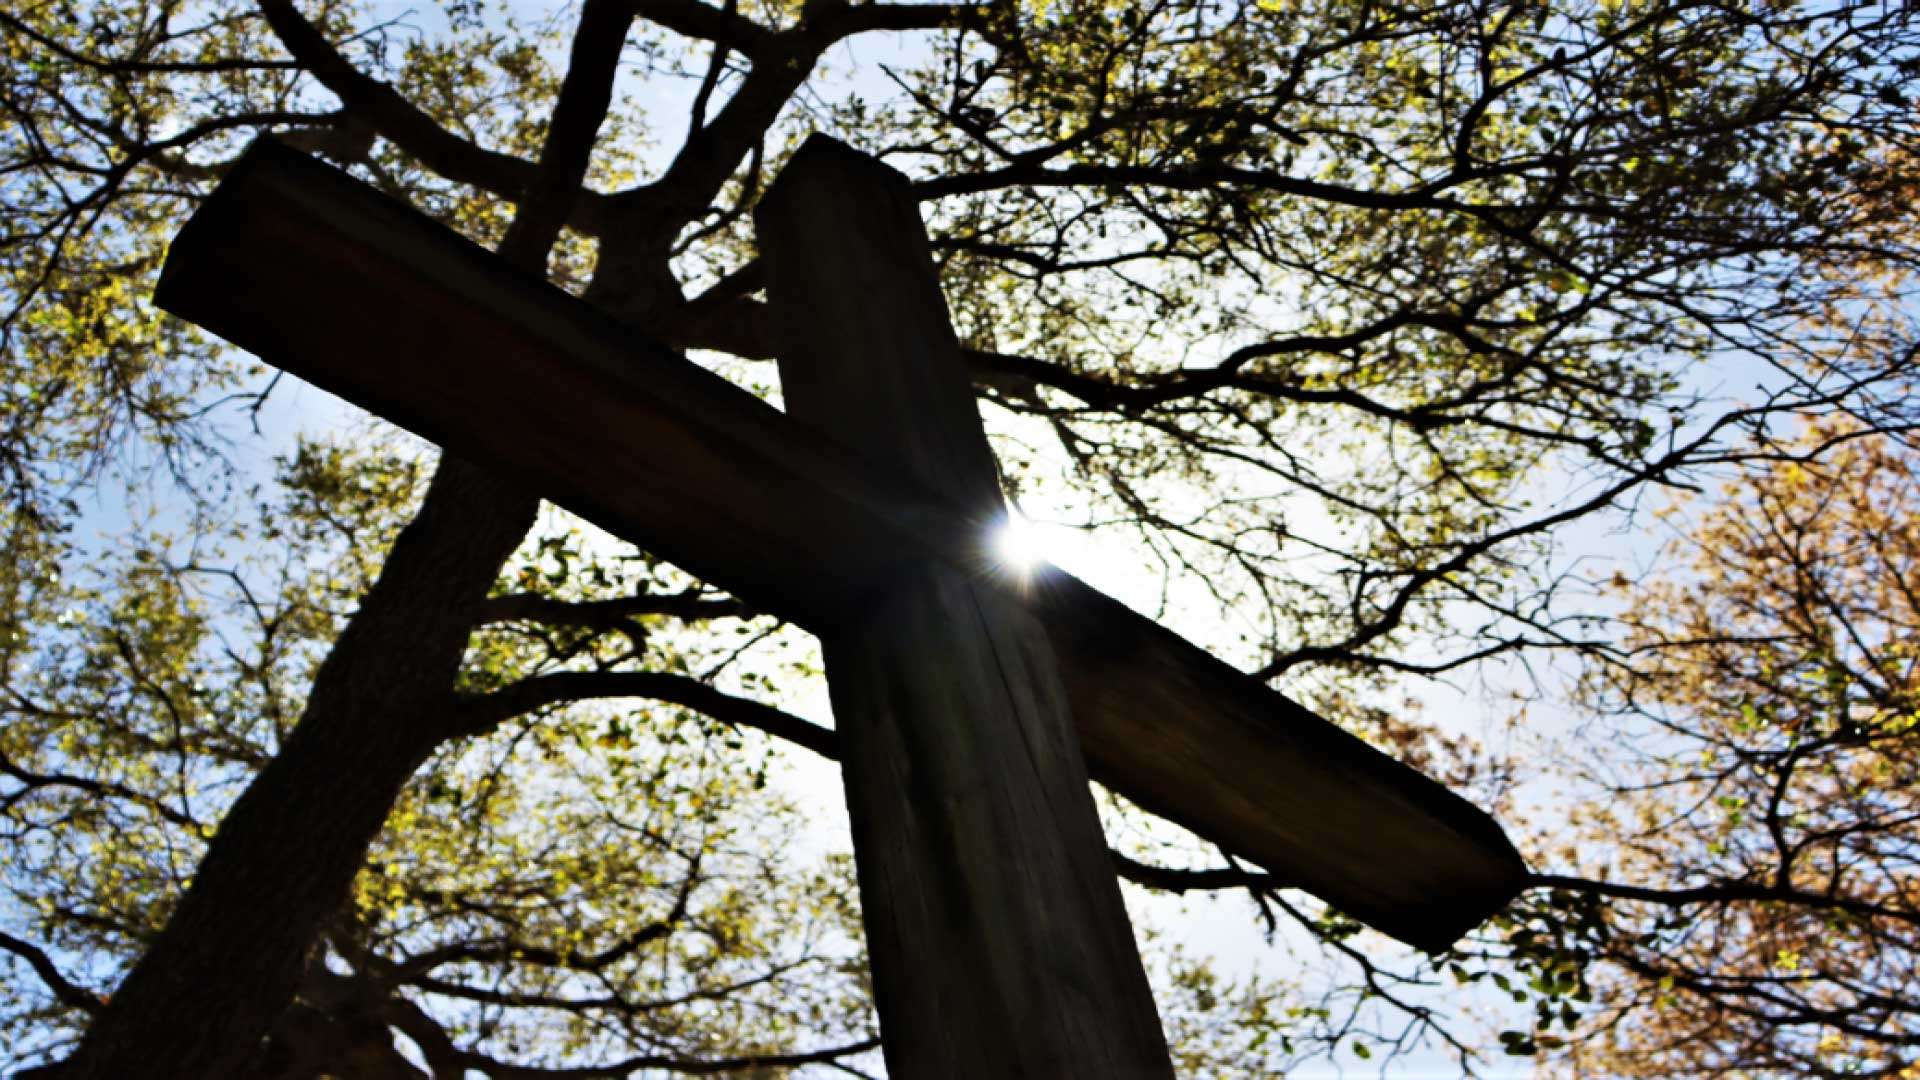 Cross in the garden silhouetted against the sky with a brilliant sun